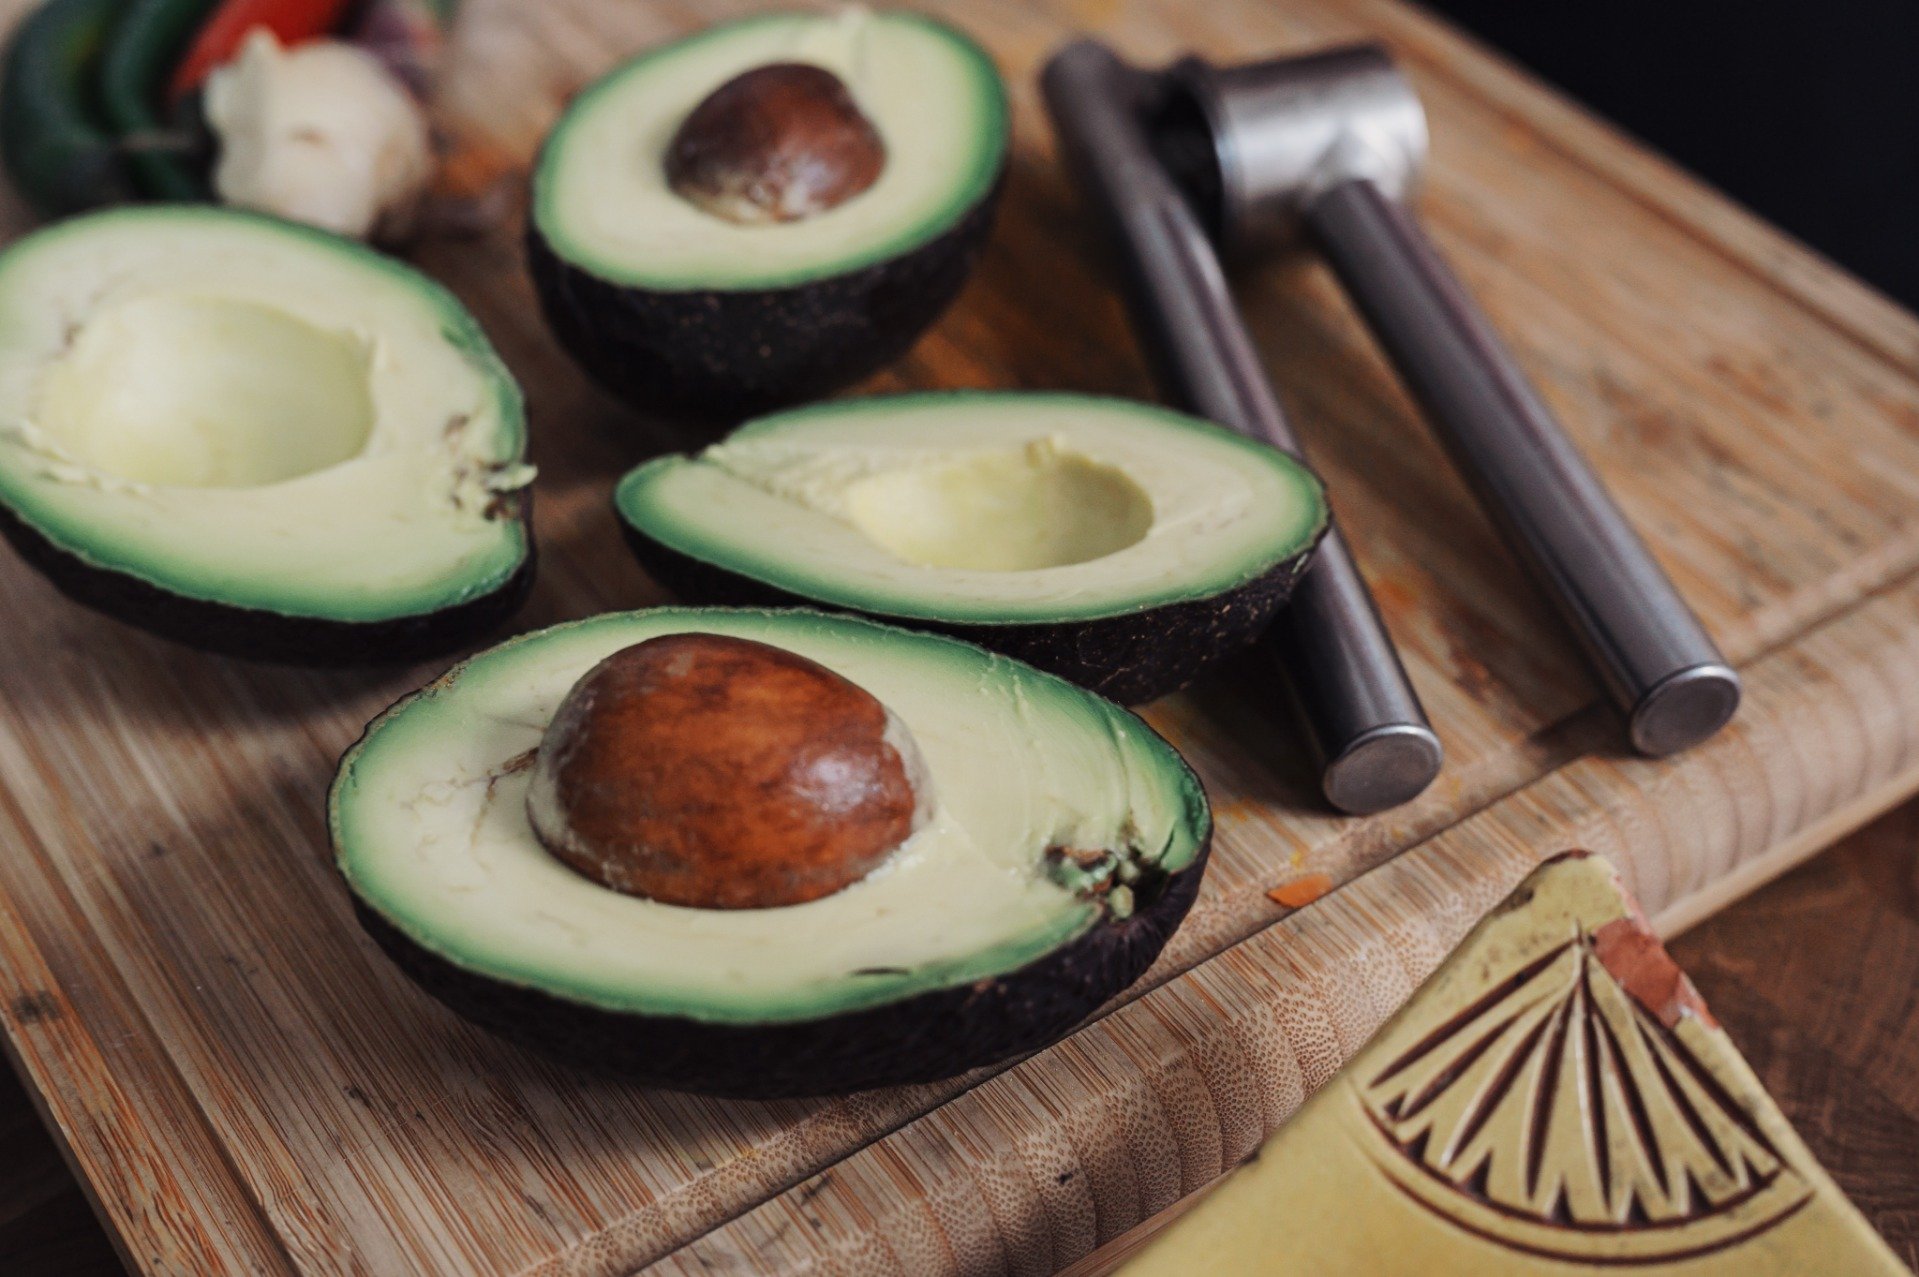 Avocado halves on a board ready to be served as a Superfood due to their good fatty acids.